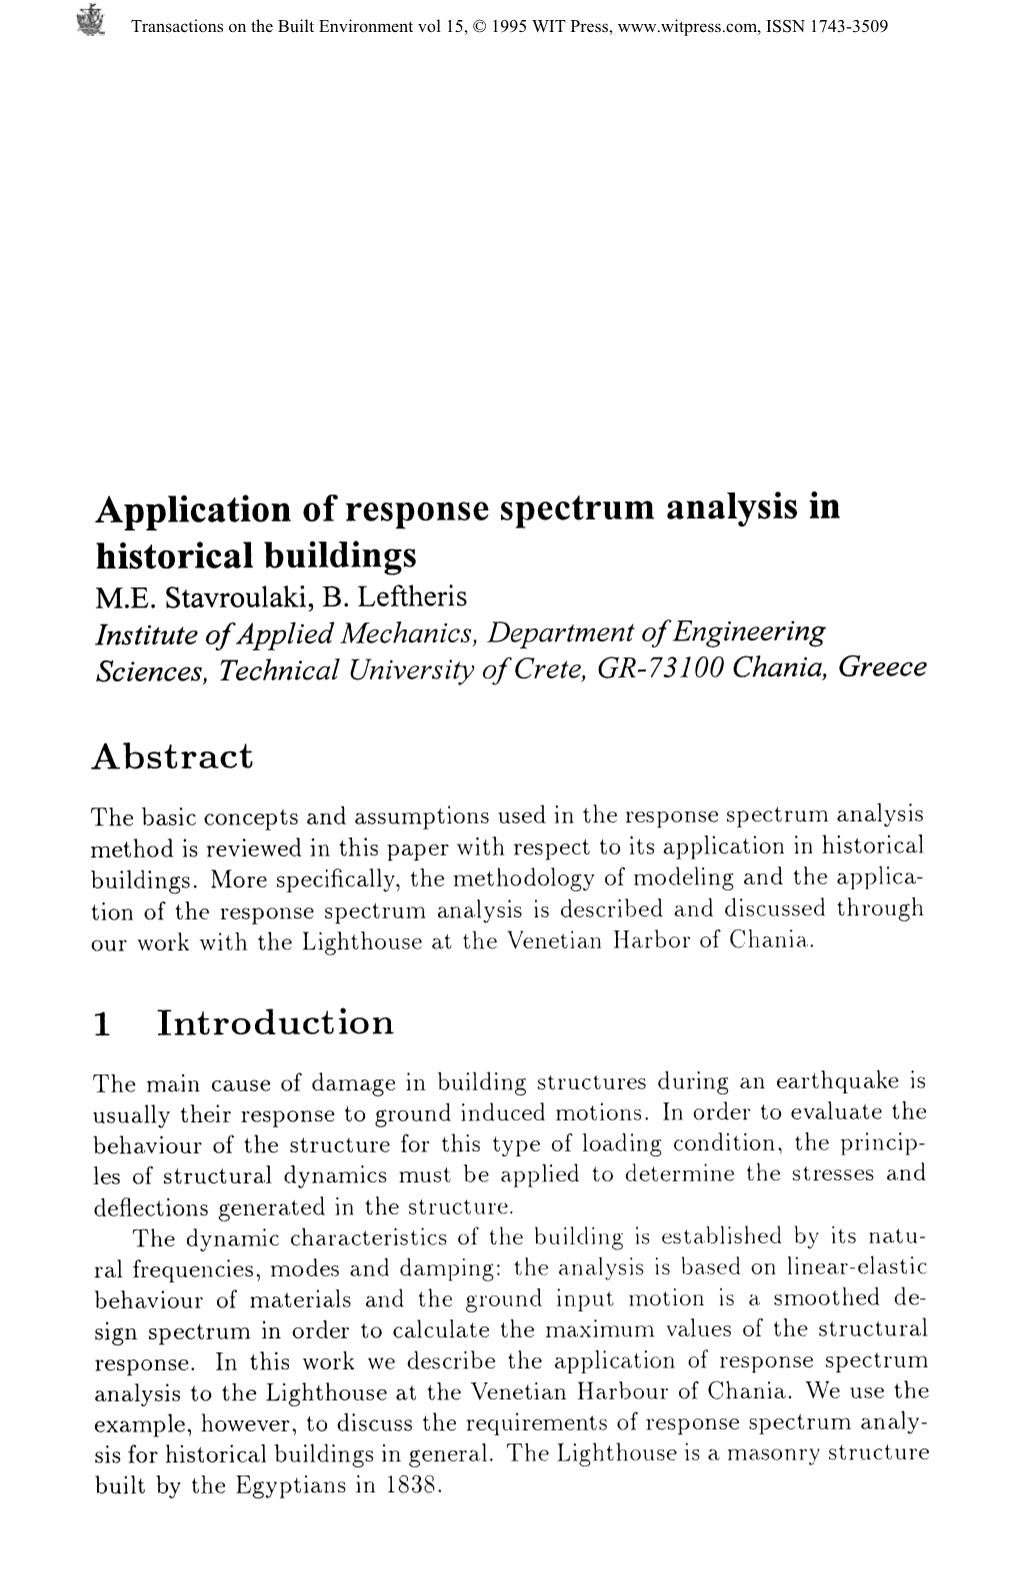 Application of Response Spectrum Analysis in Historical Buildings